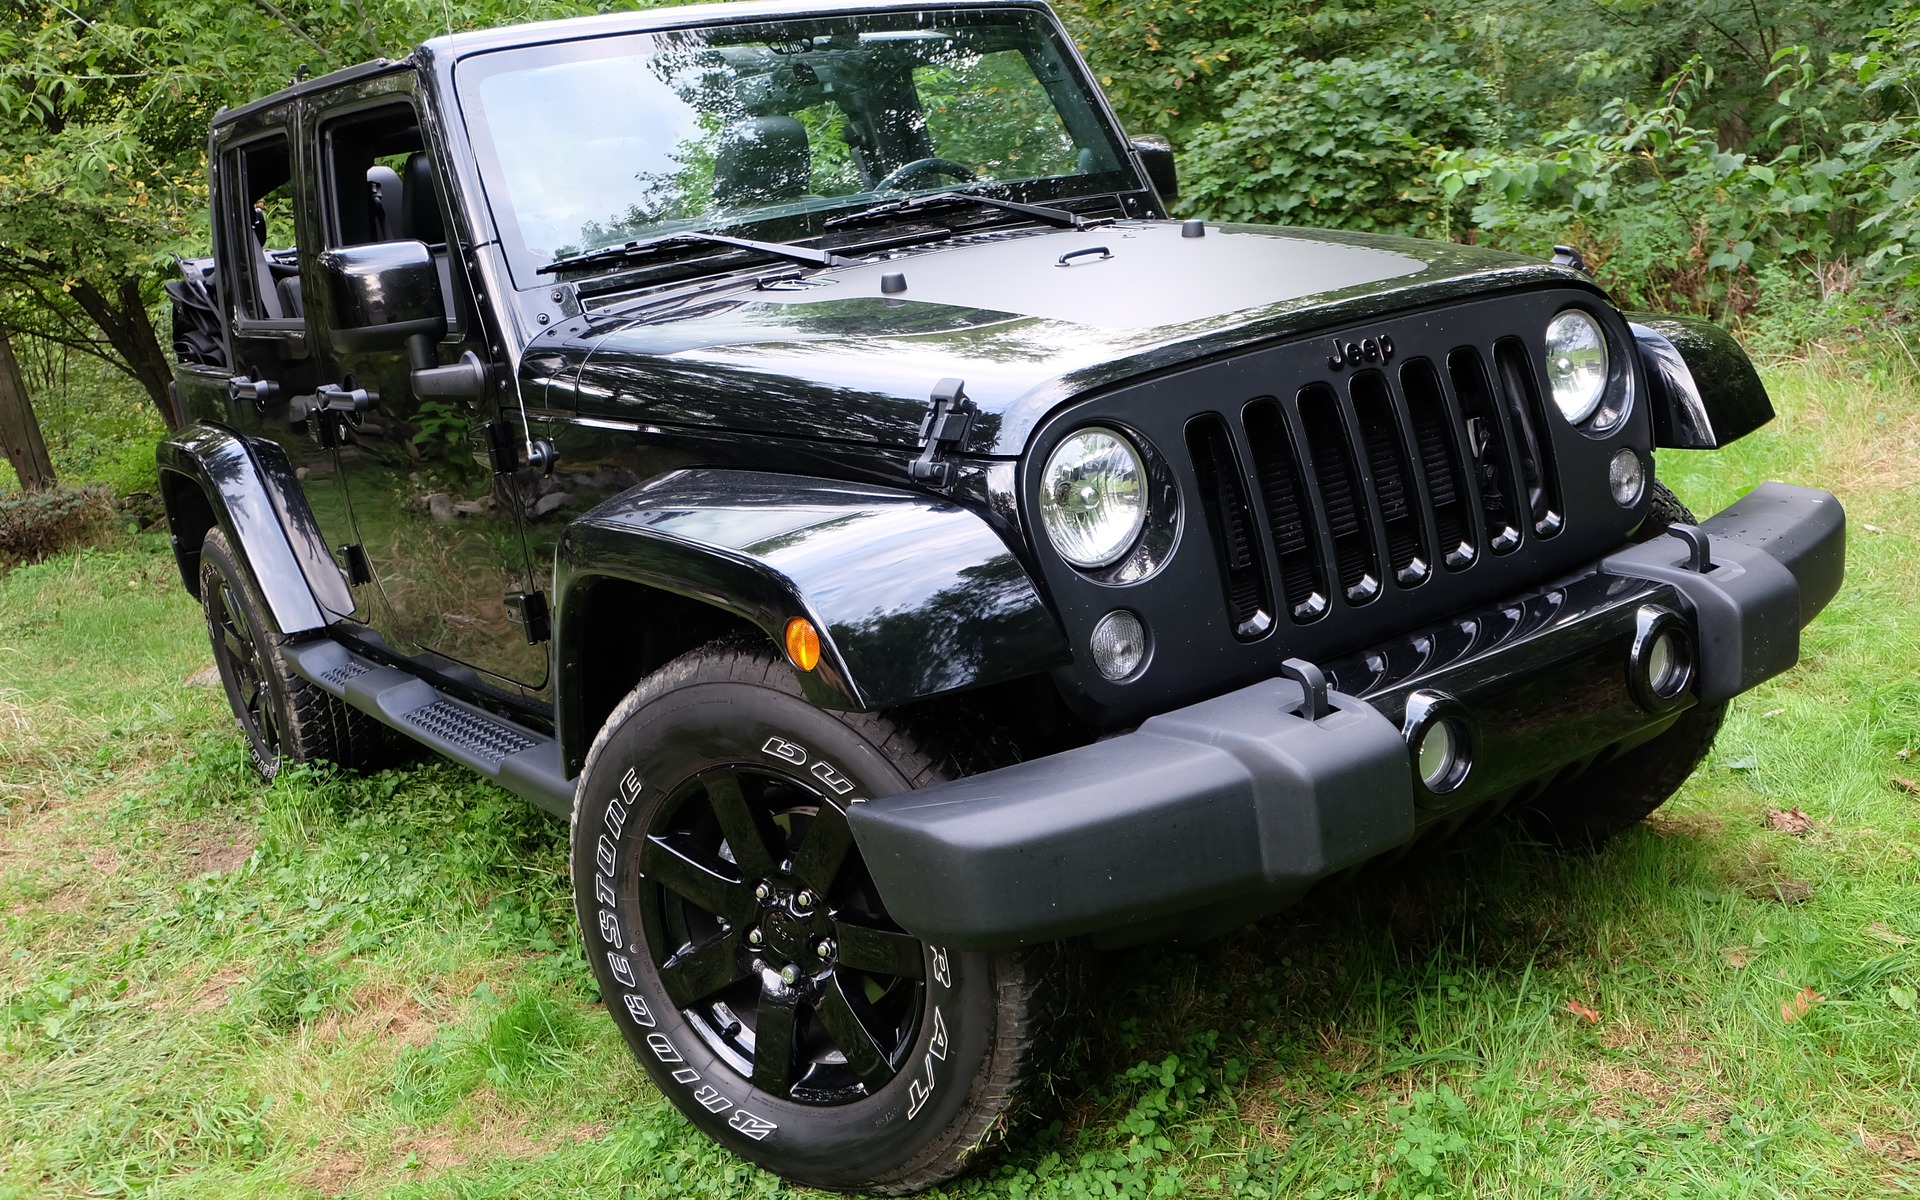 The Next Jeep Wrangler Could Be Radically Different - The Car Guide